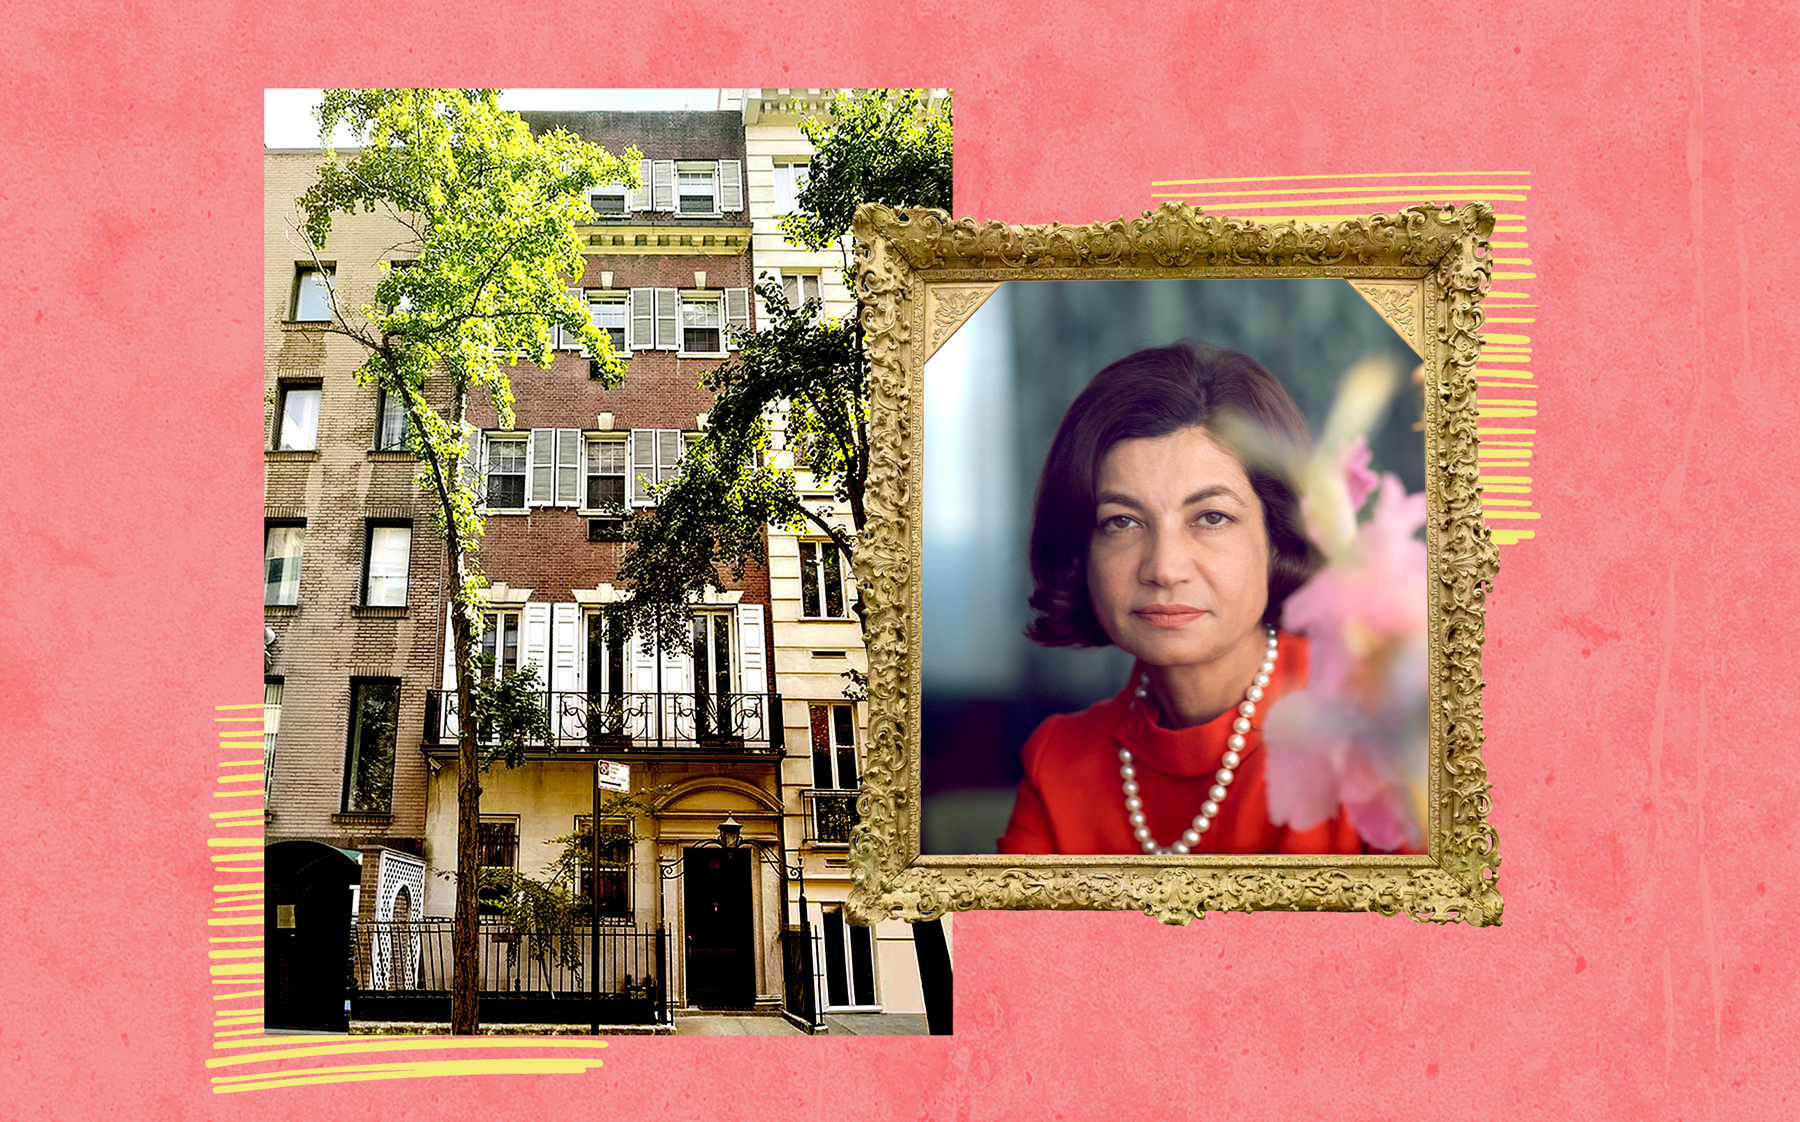 29 Beekman Place and Princess Ashraf Pahlavi (Getty, Courtesy of Zillow)